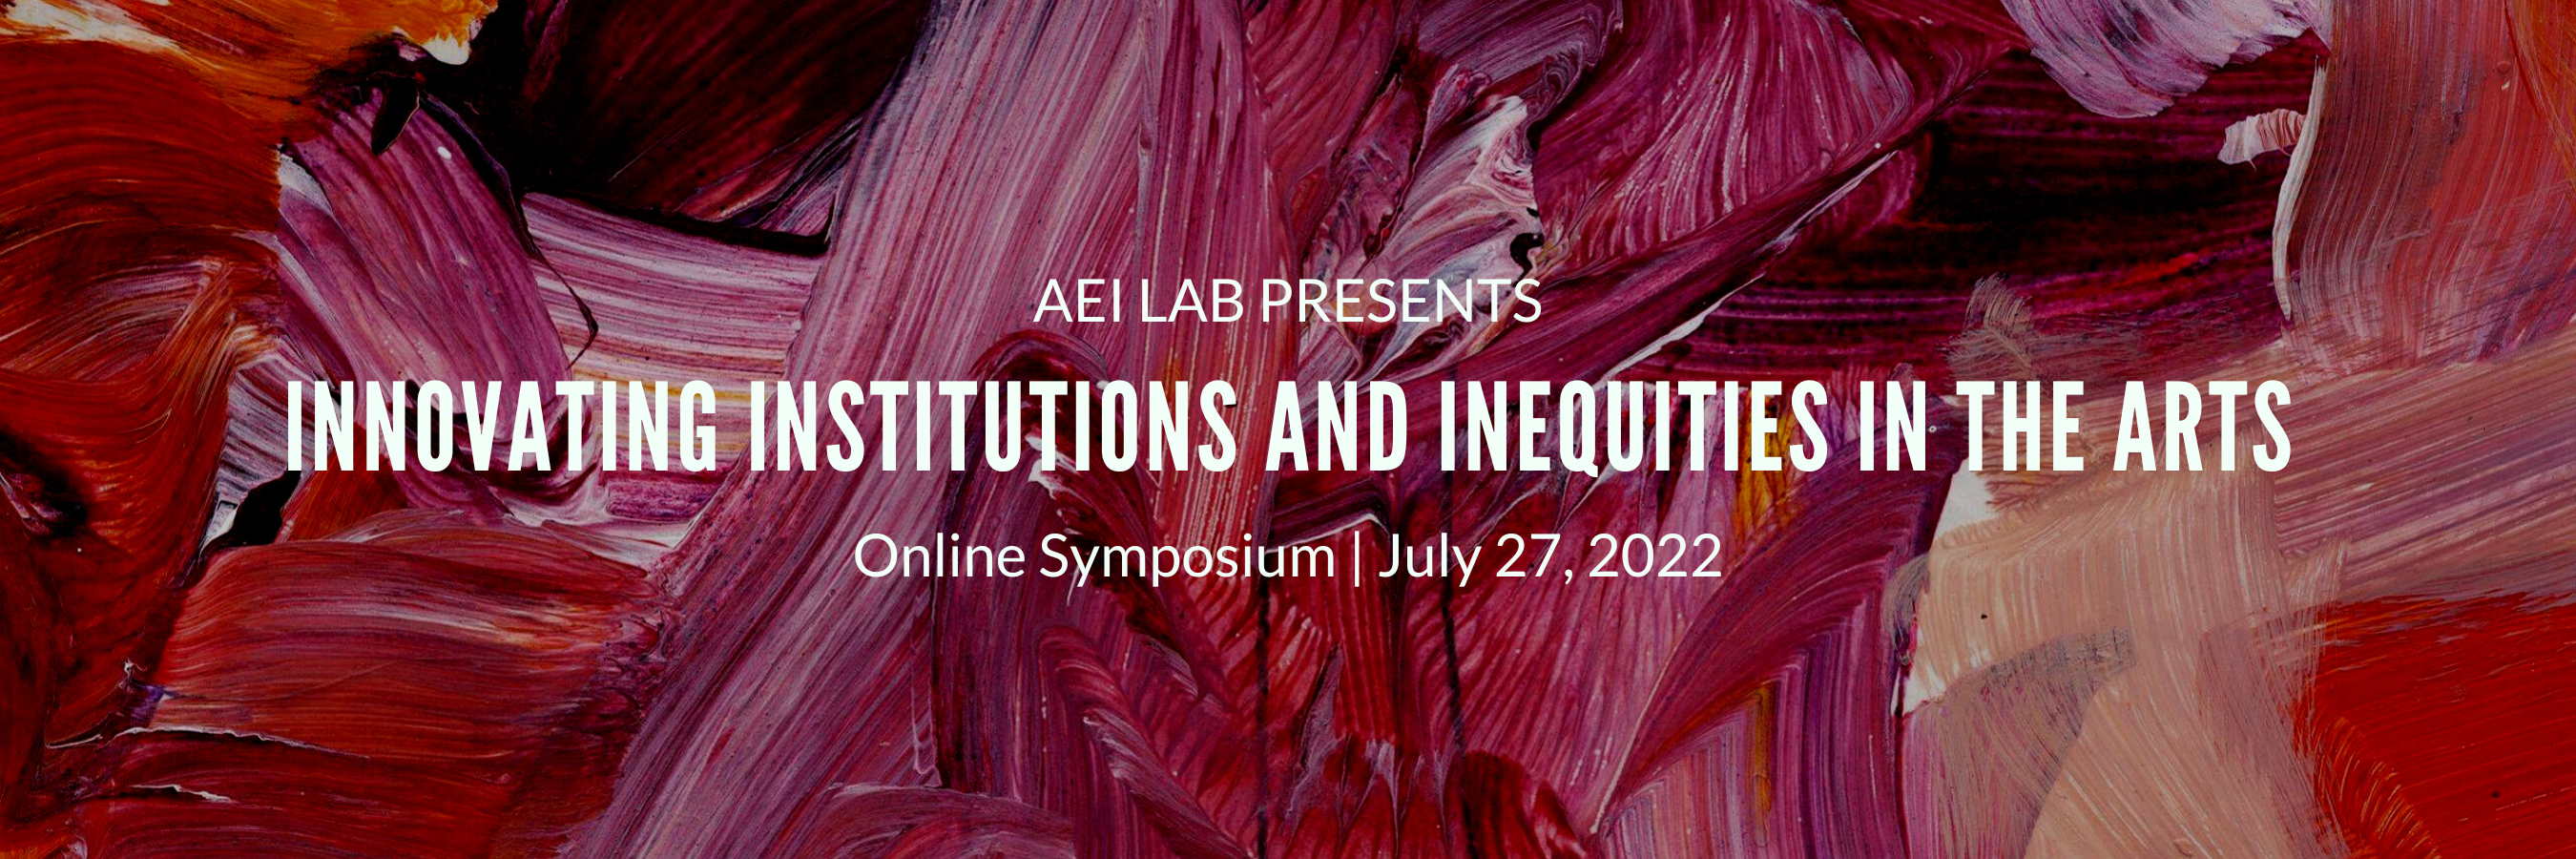 AEI Lab Online Symposium, July 27 - Innovating Institutions and Inequities in the Arts